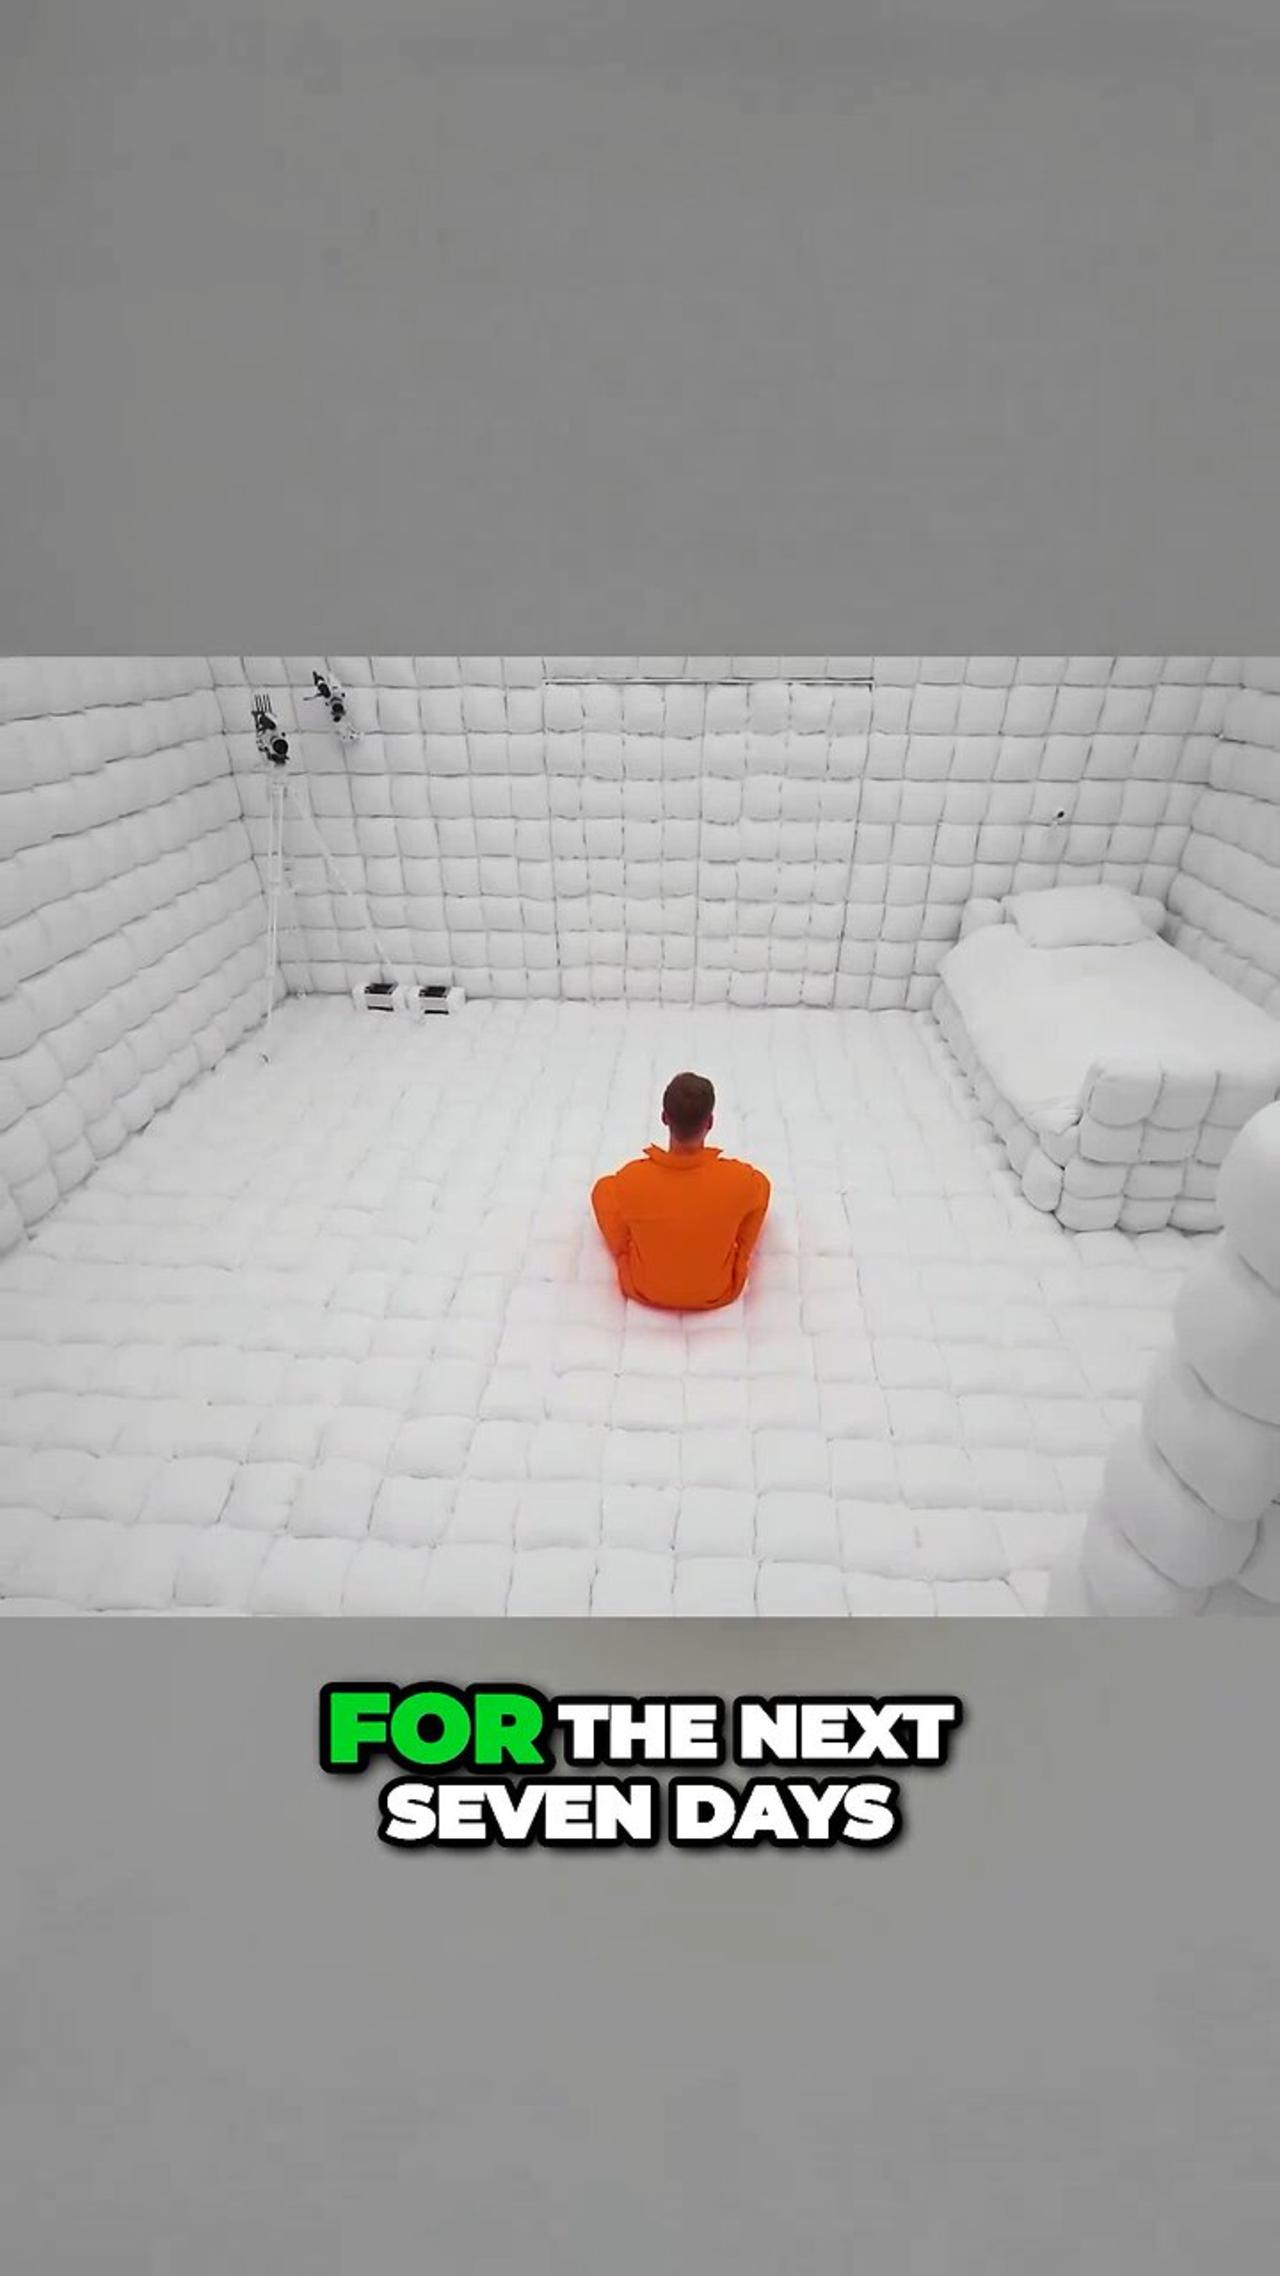 Mr Beast Spending 7 days in solitary confinement